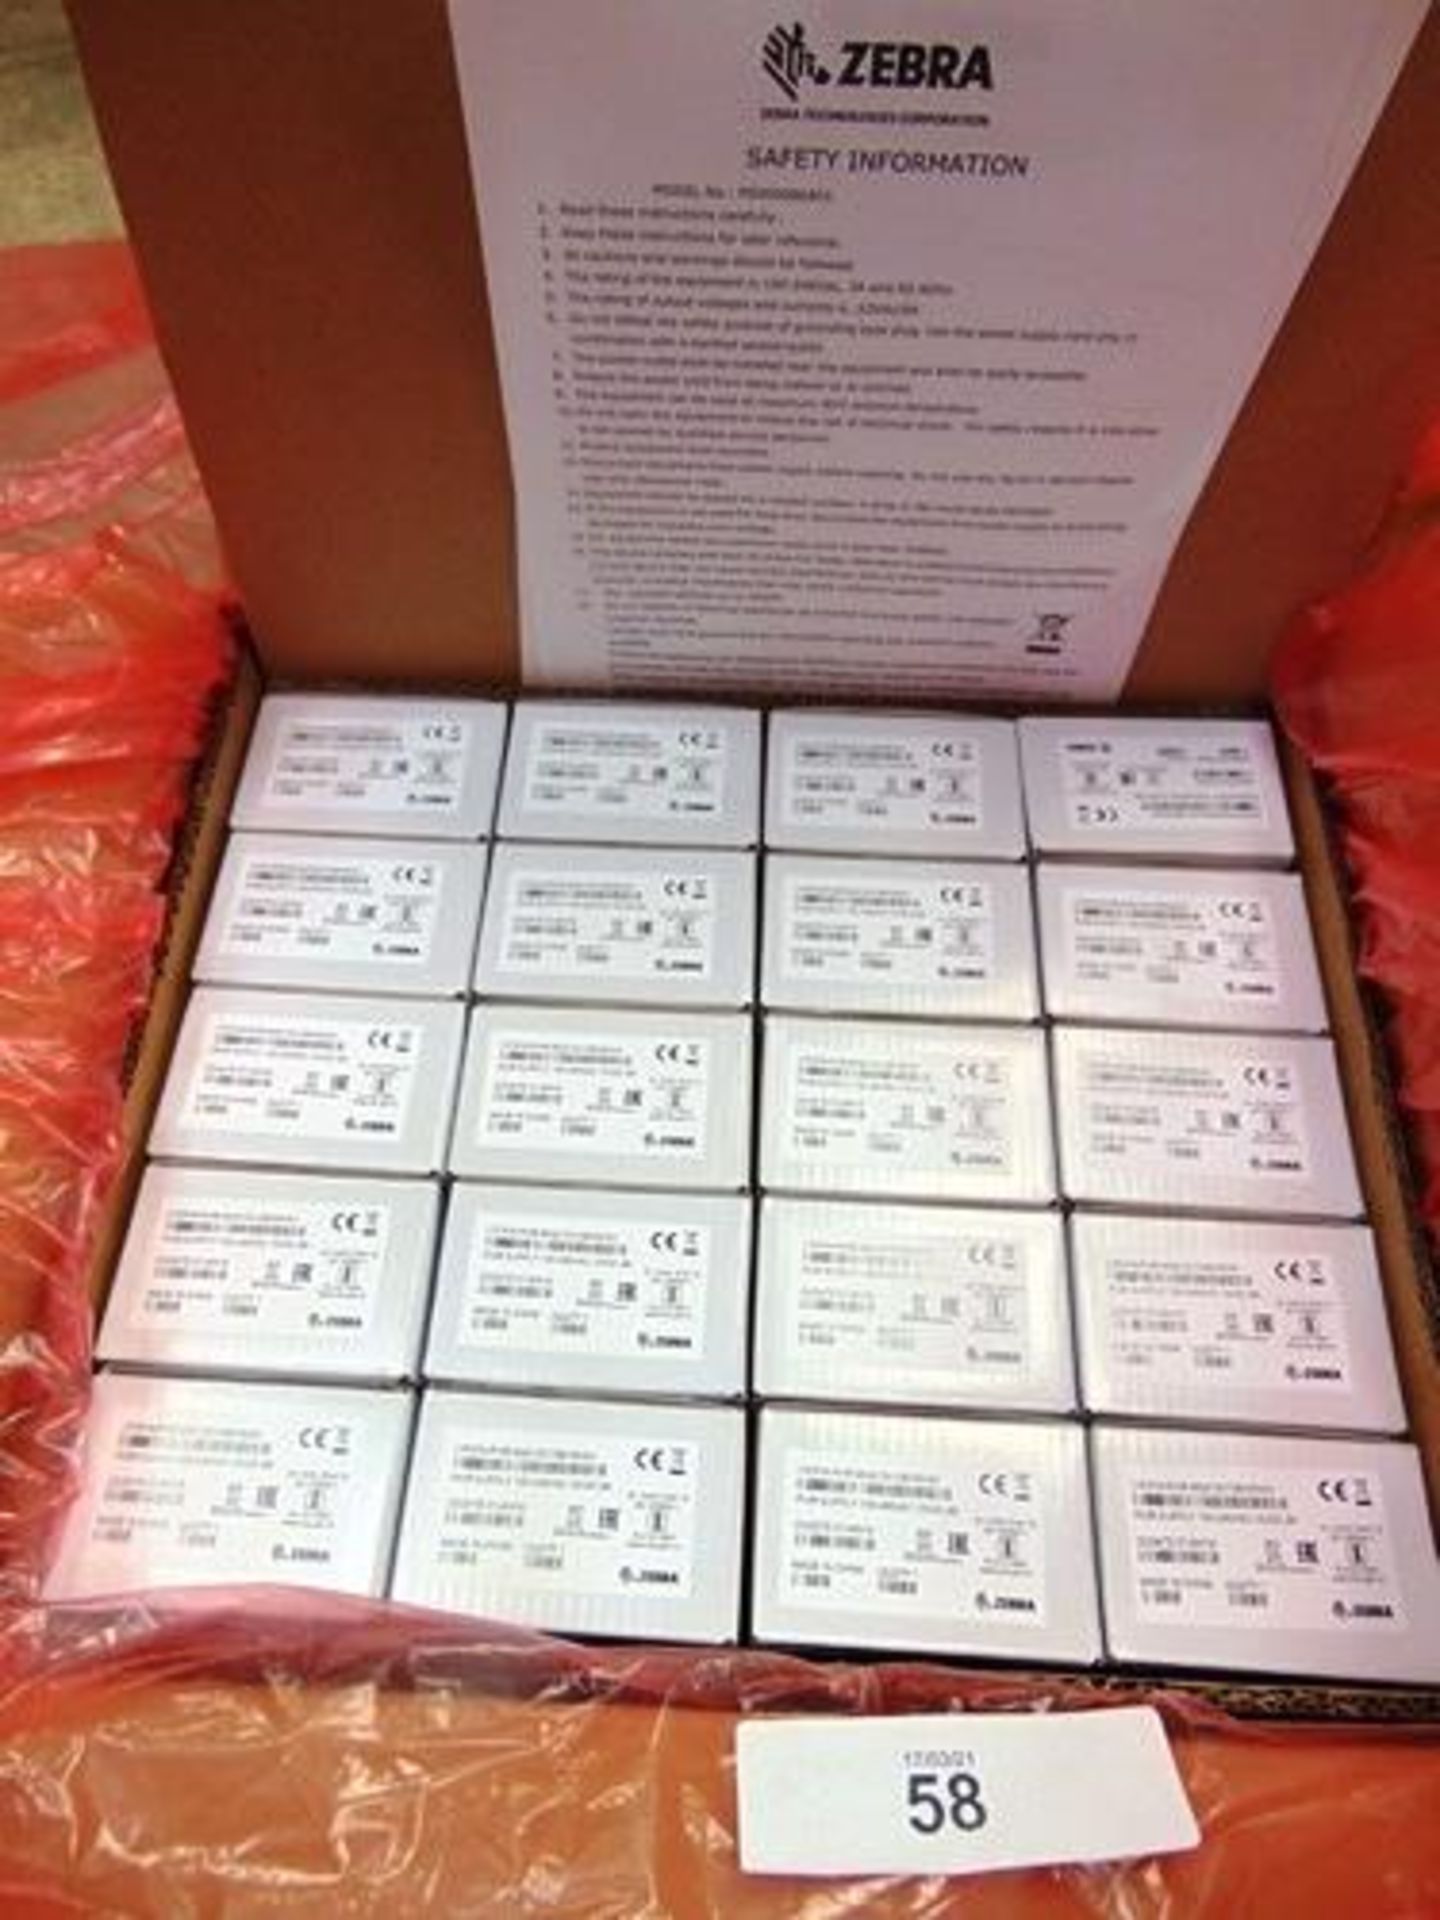 20 x Zebra 12V 9amp power supply units with power supply cables - New (ES3)